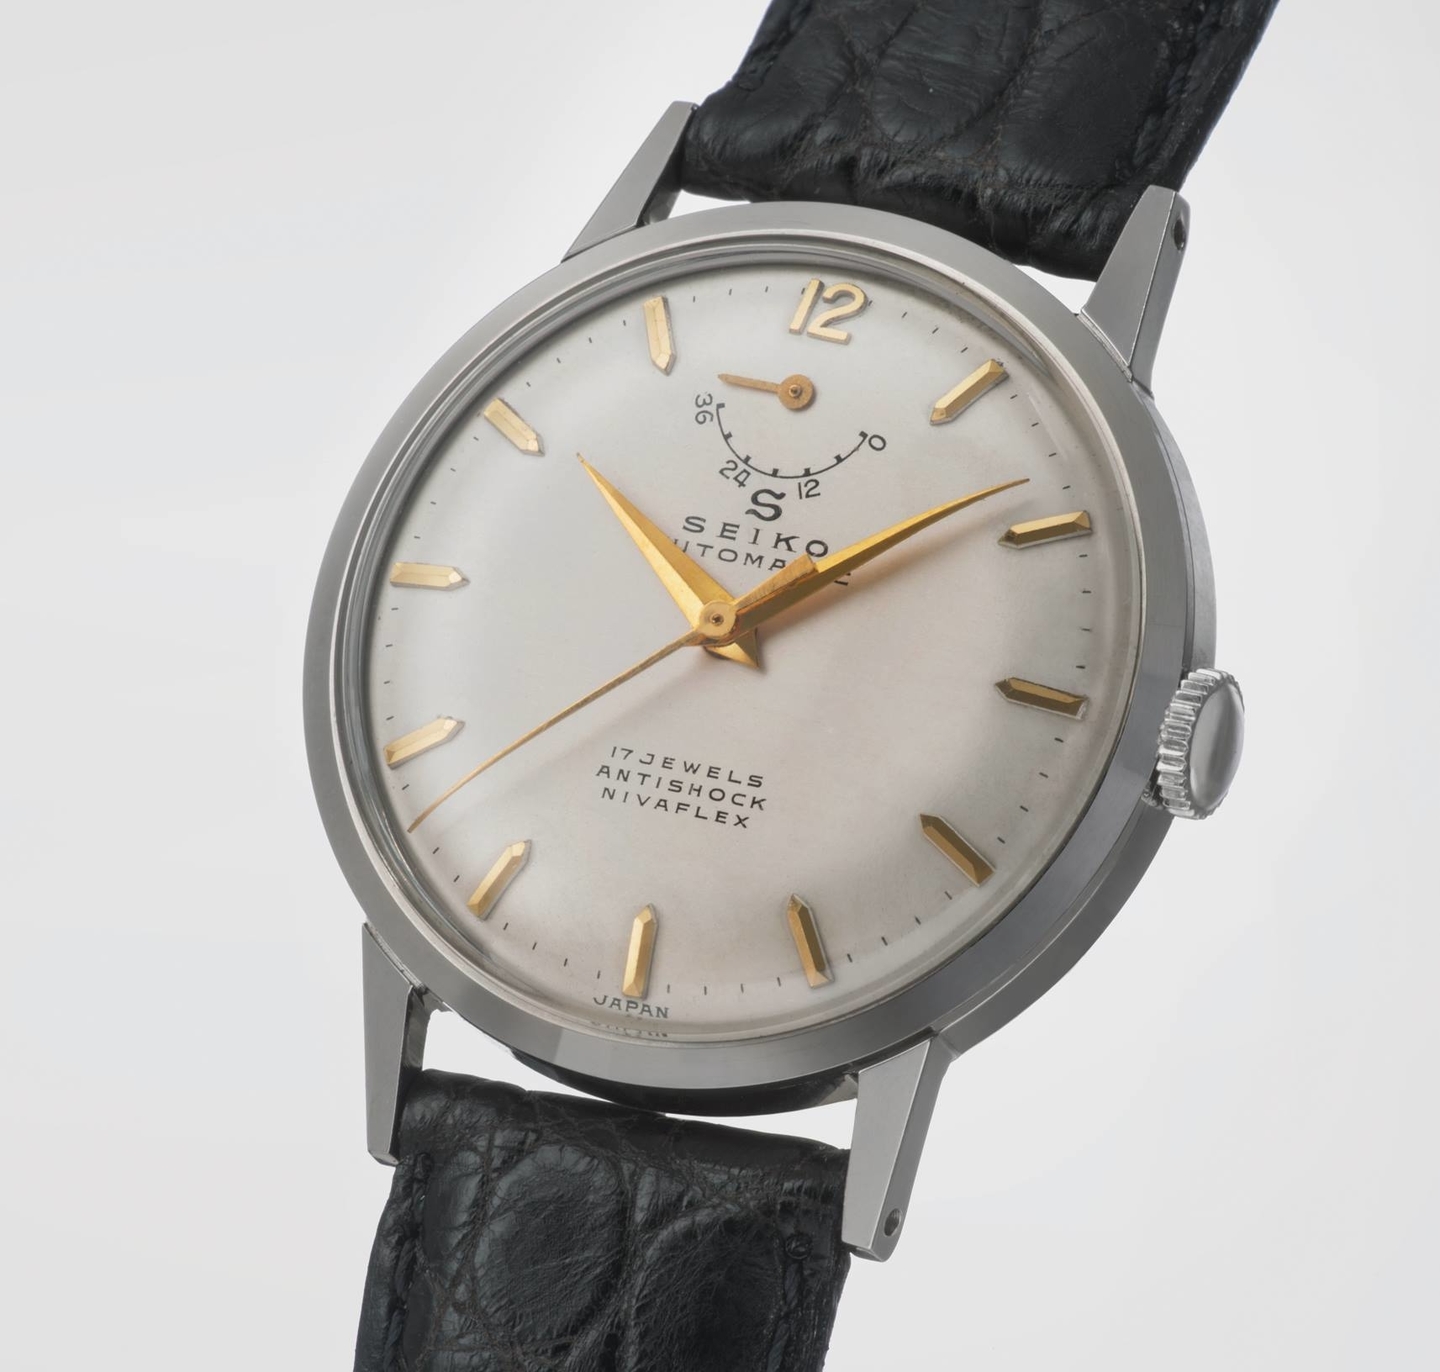 Japan’s first automatic mechanical watch